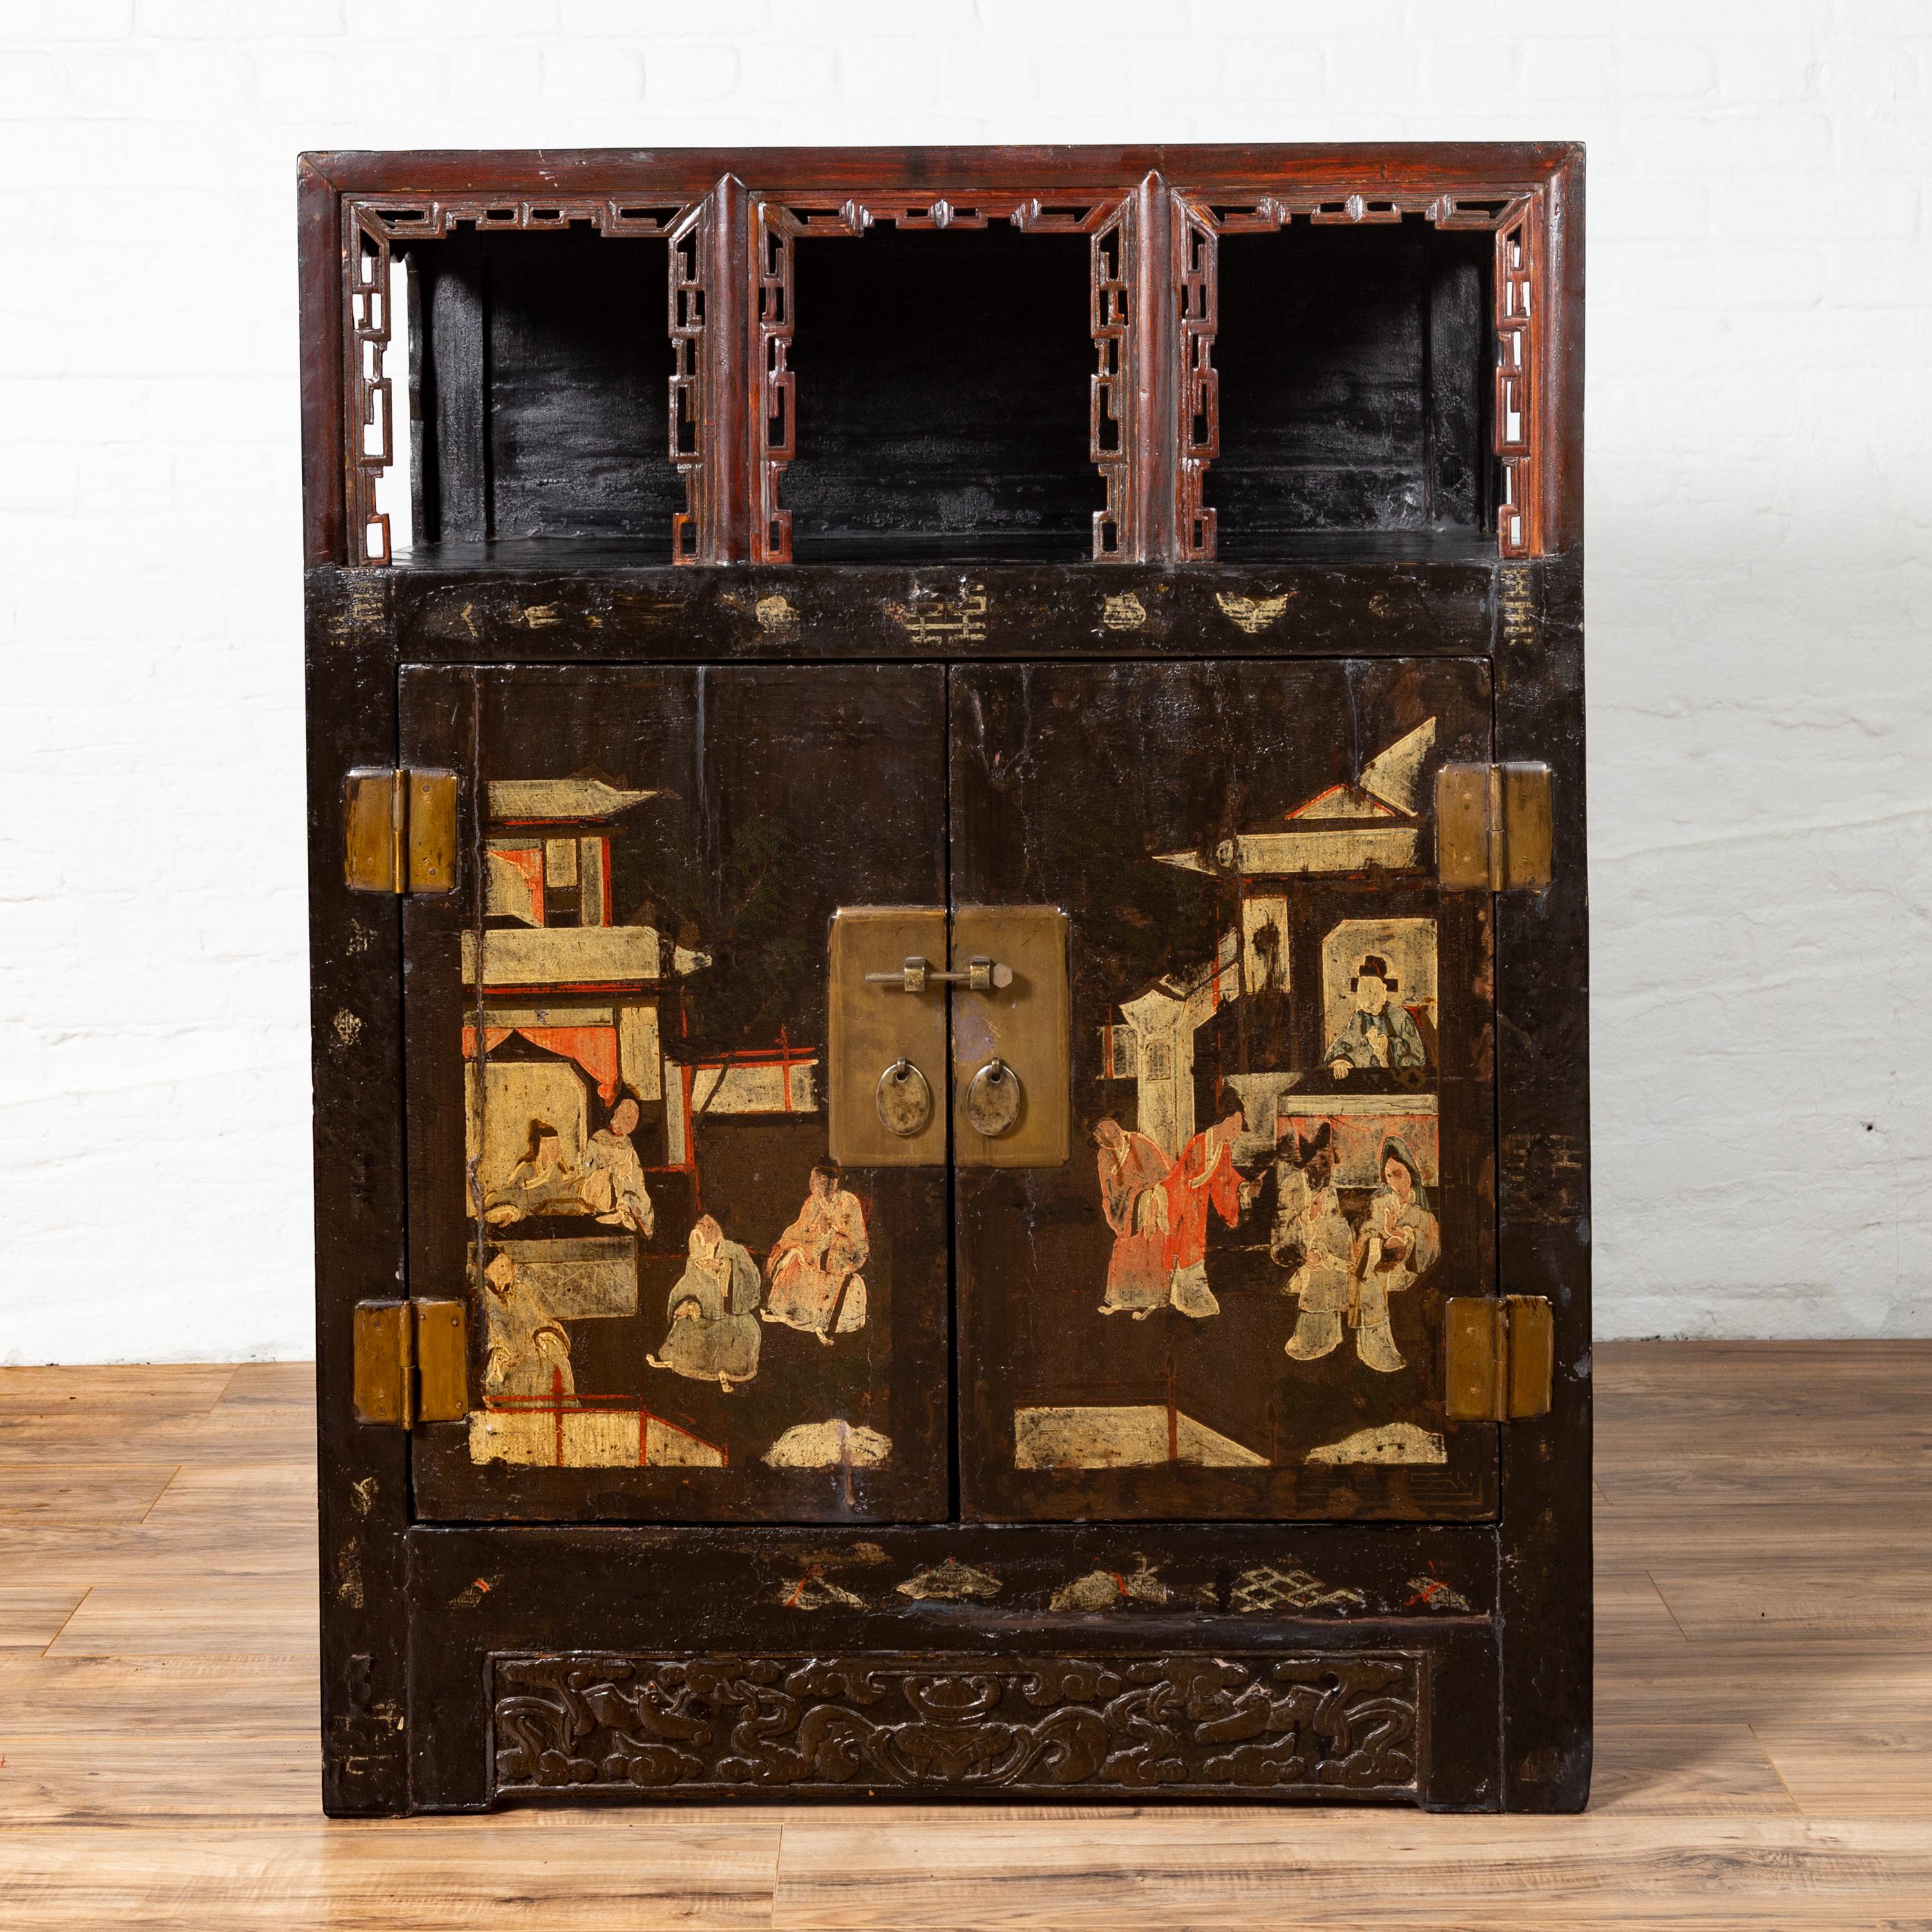 Chinese 19th century antique display cabinet with hand painted chinoiserie scene, open shelf, two doors and carved accents. Born in China in the 19th century, this exquisite display cabinet features an open shelf in its upper section, accented with